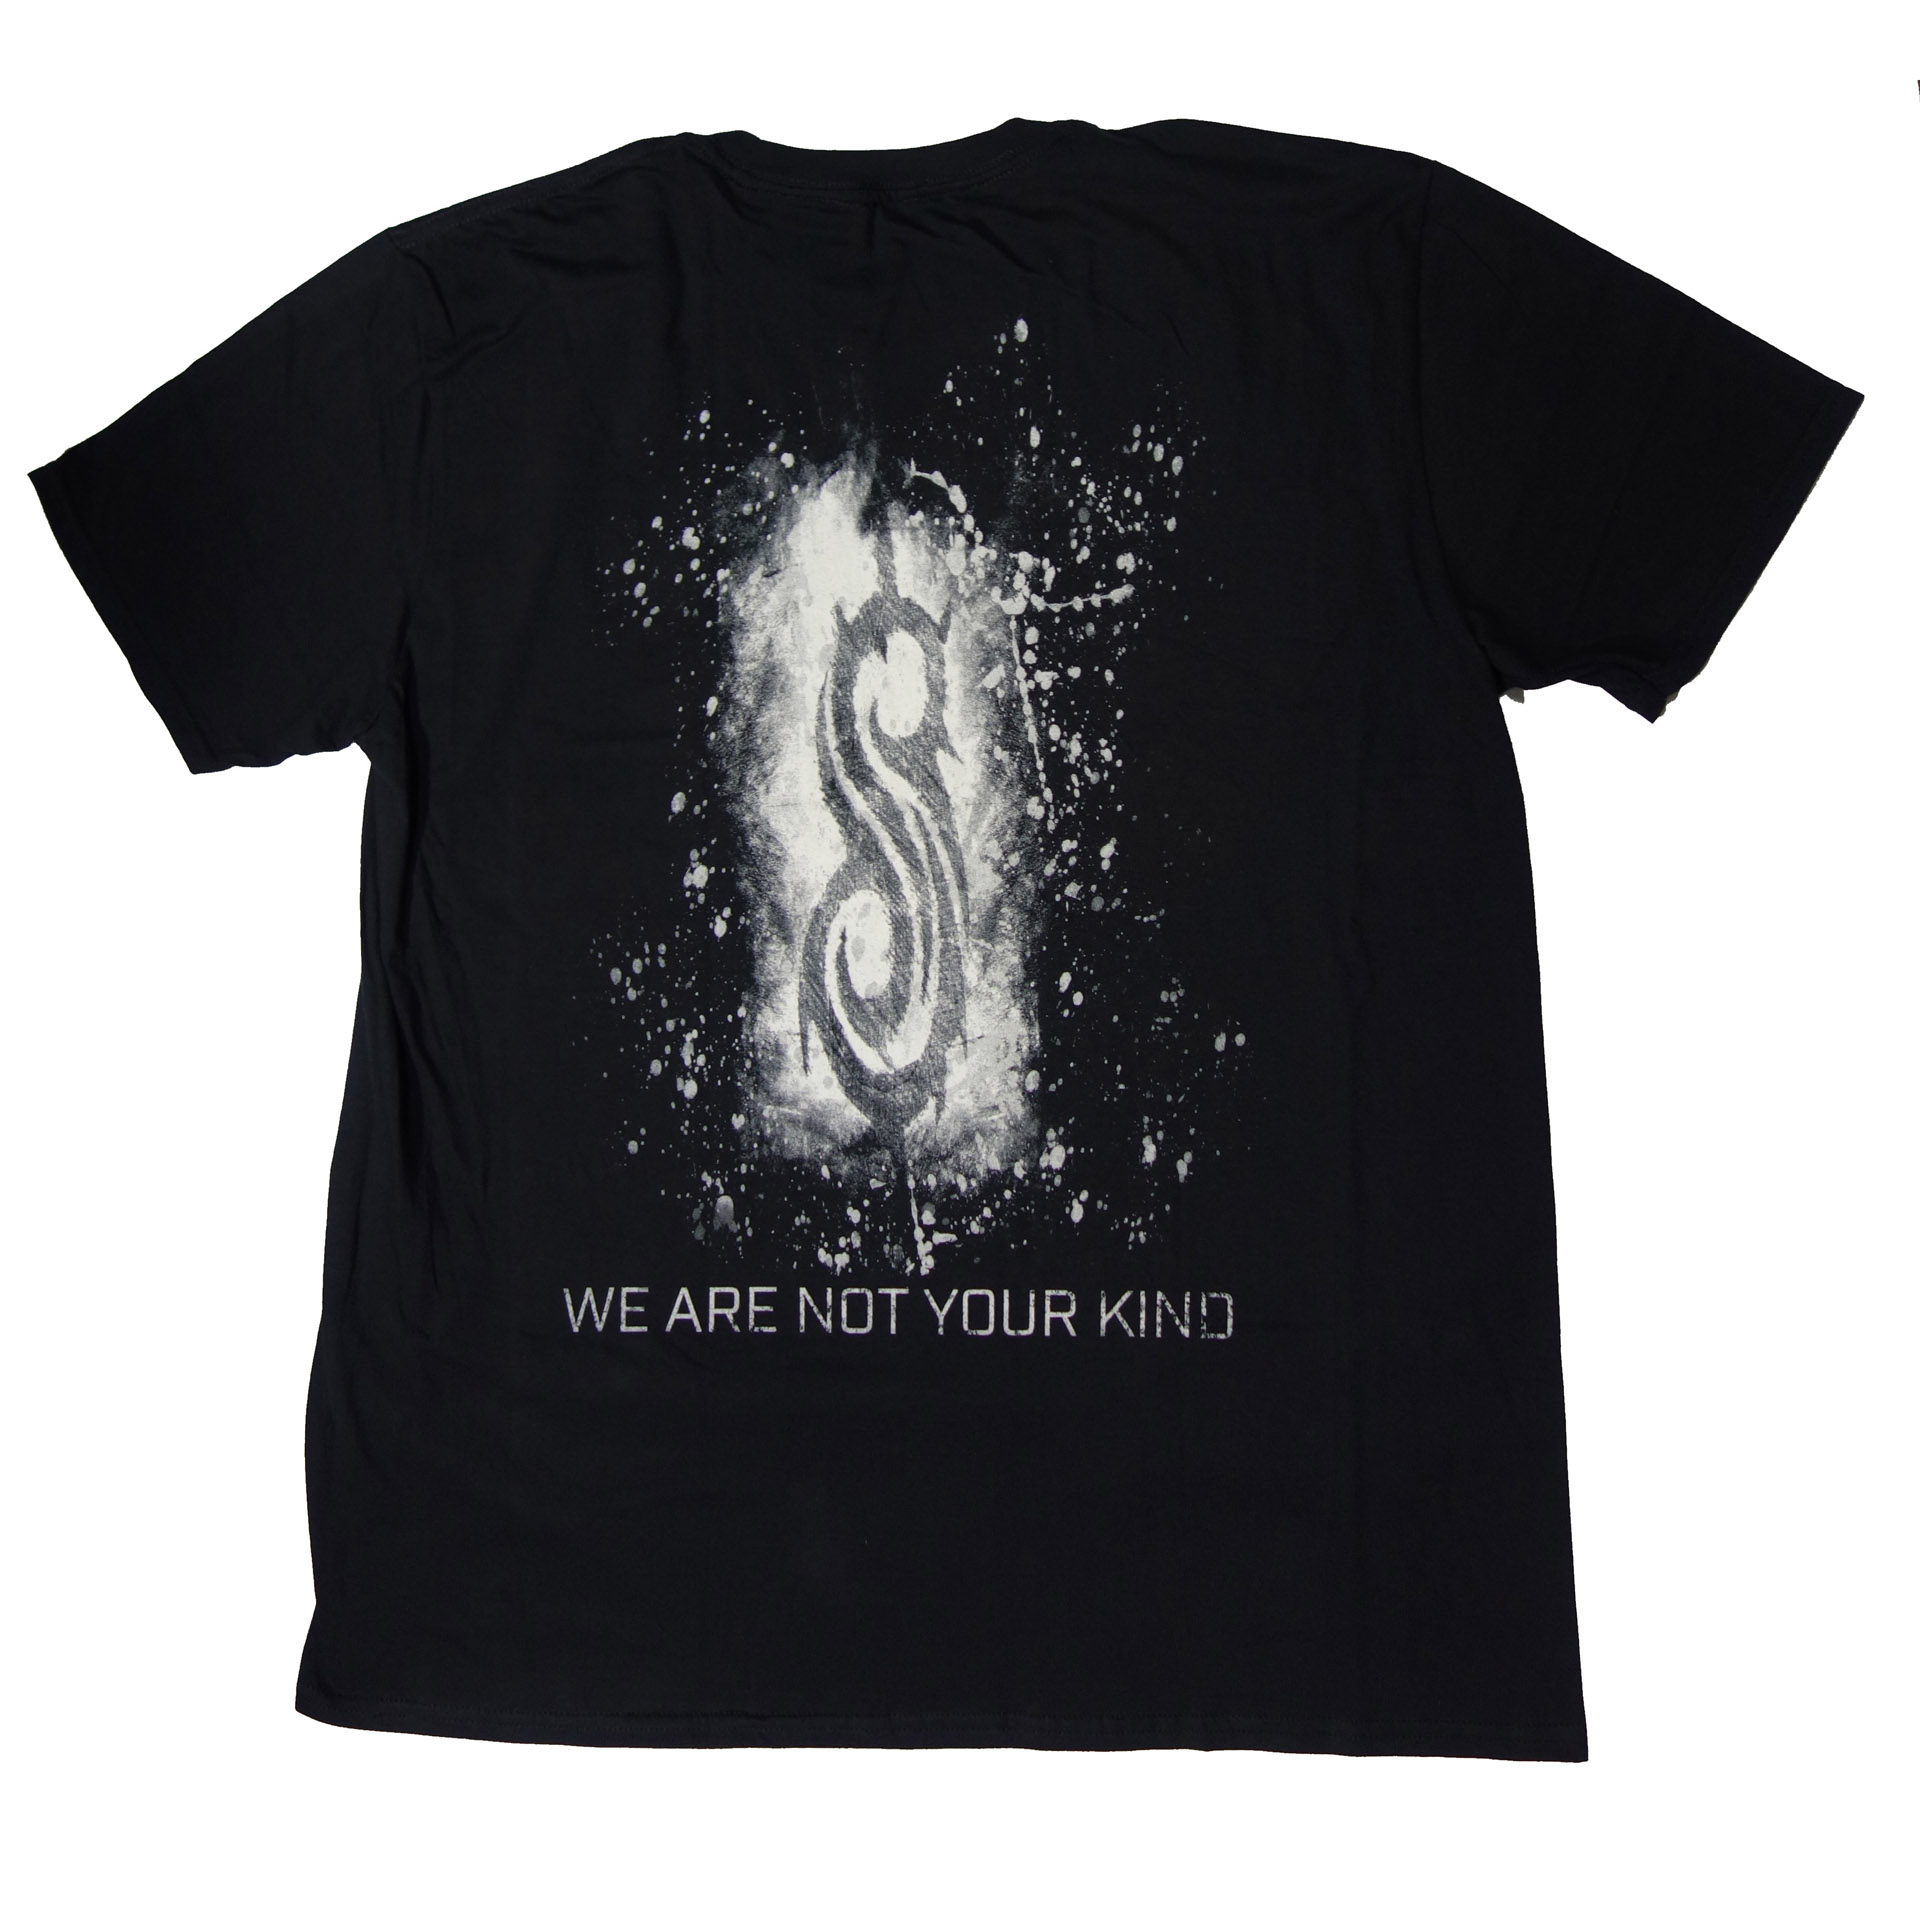 T-Shirt Slipknot We Are Not Your Kind